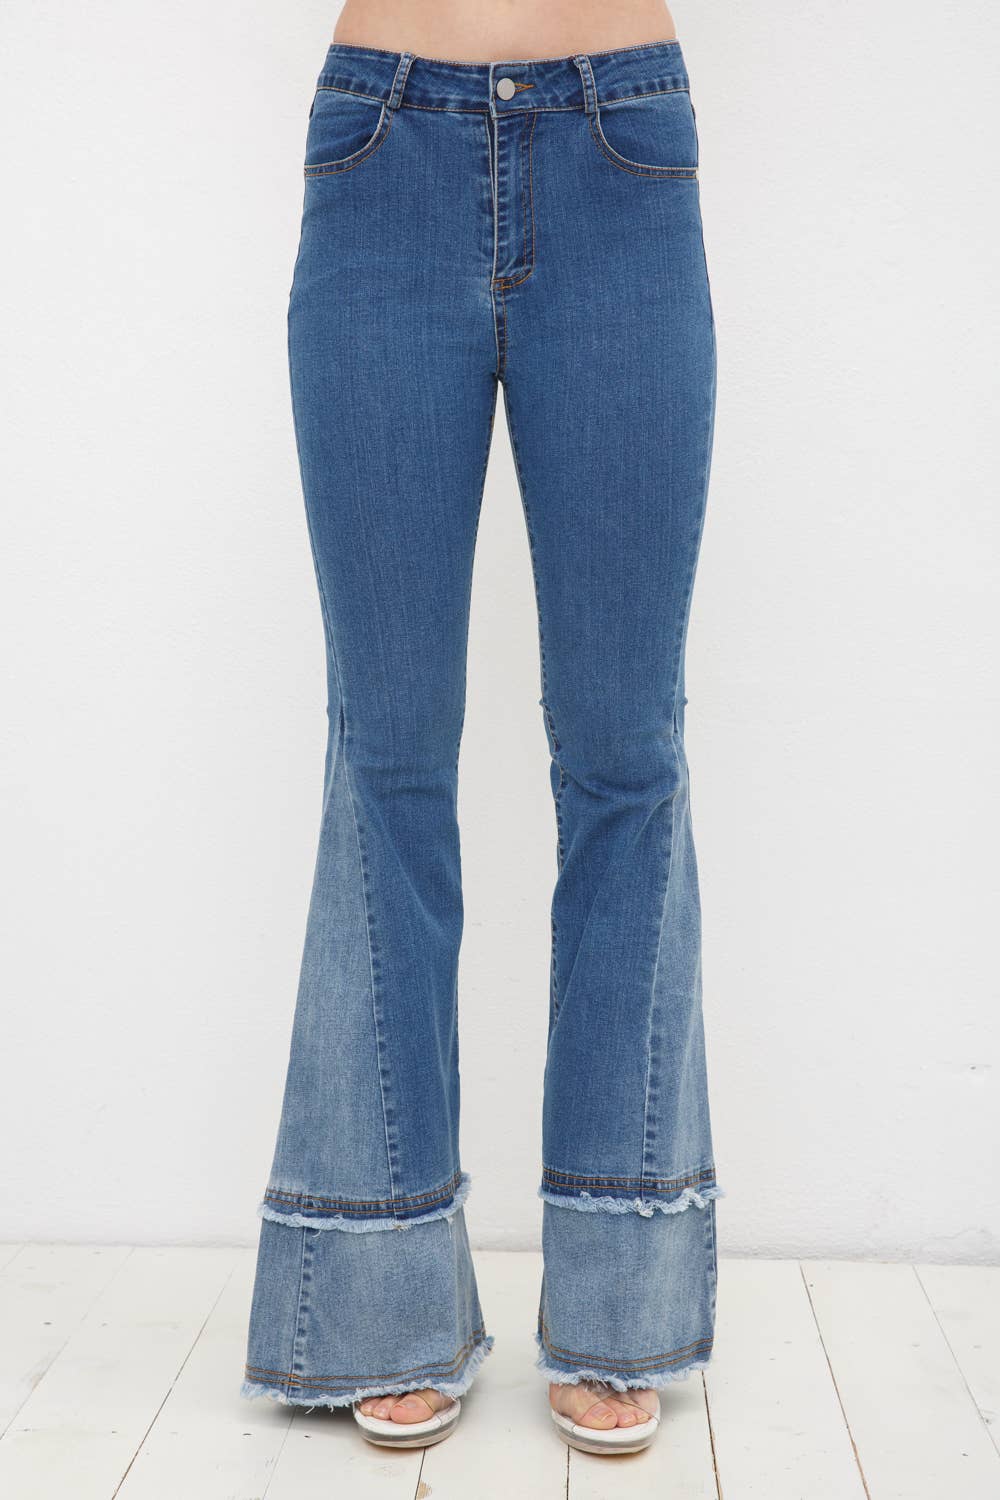 Two Tone Frayed Detail Bell Bottom Denim Jeans